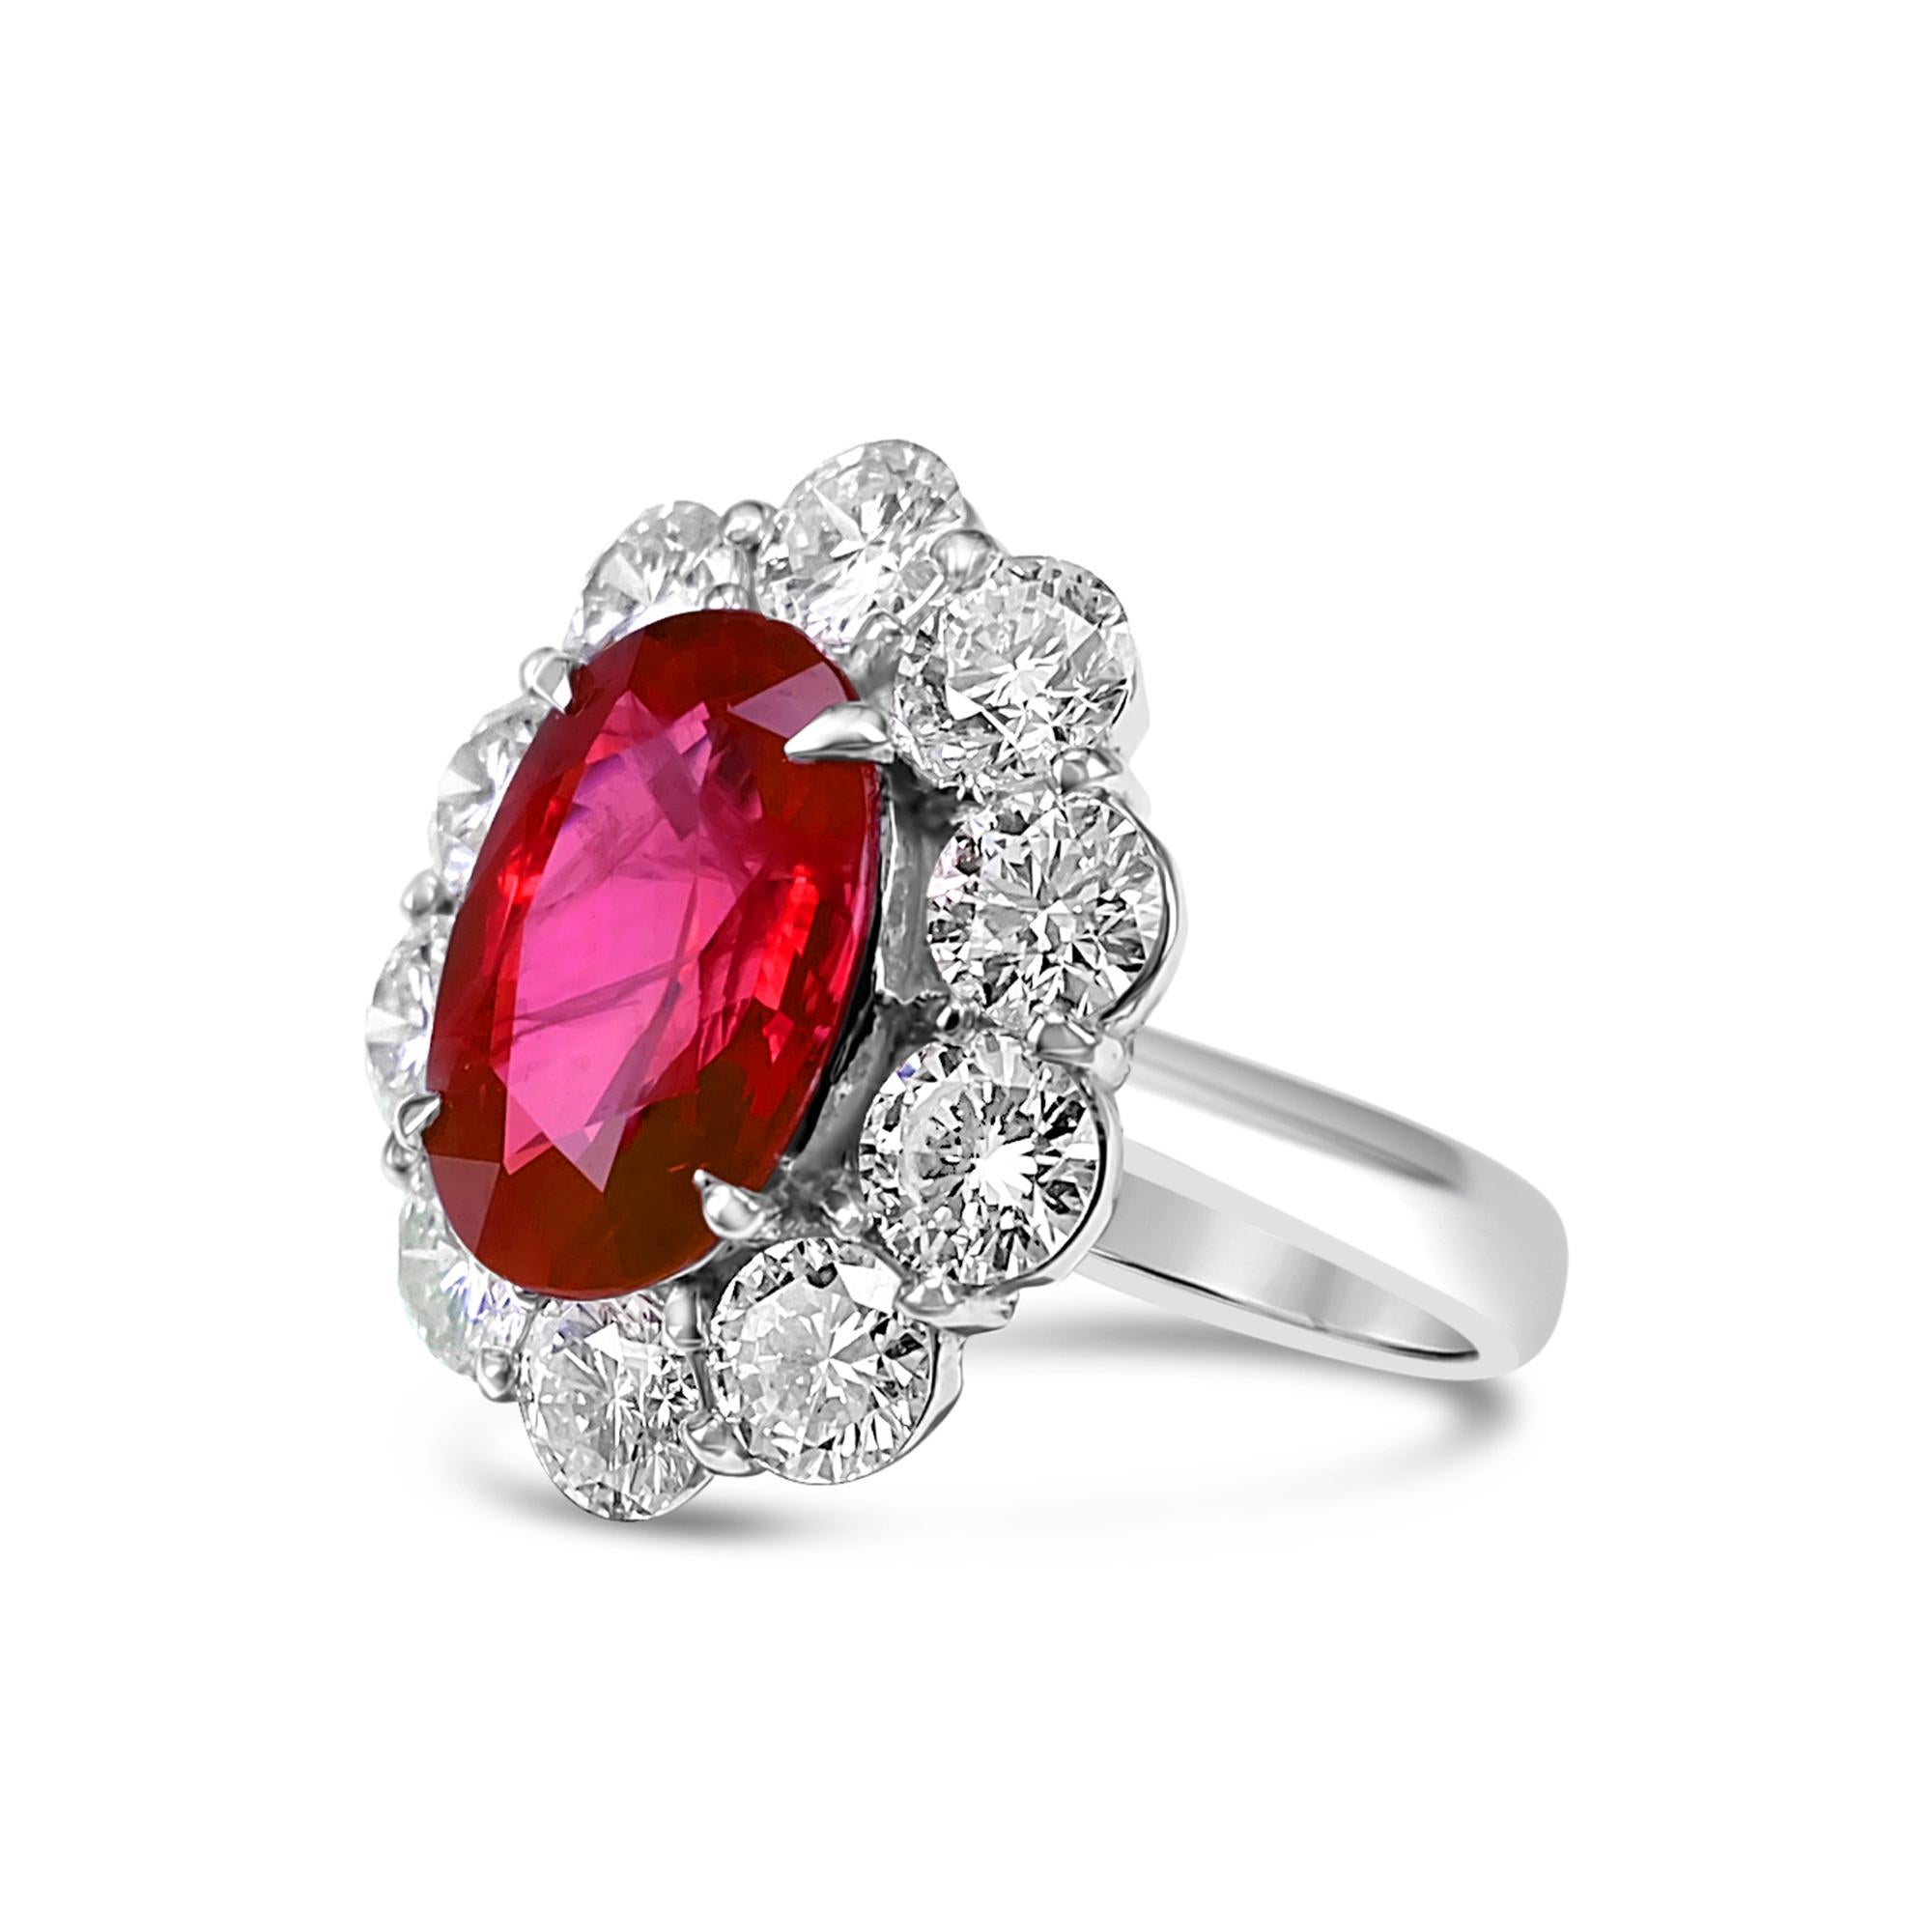 GIA Certified 4.18 Carat Ruby from Burma are set with D color VVS clarity diamond in this PT 900 wedding ring. Burmese rubies are rarer than even diamonds. Because of their absolute rarity and high global demand, every high-quality piece is priced